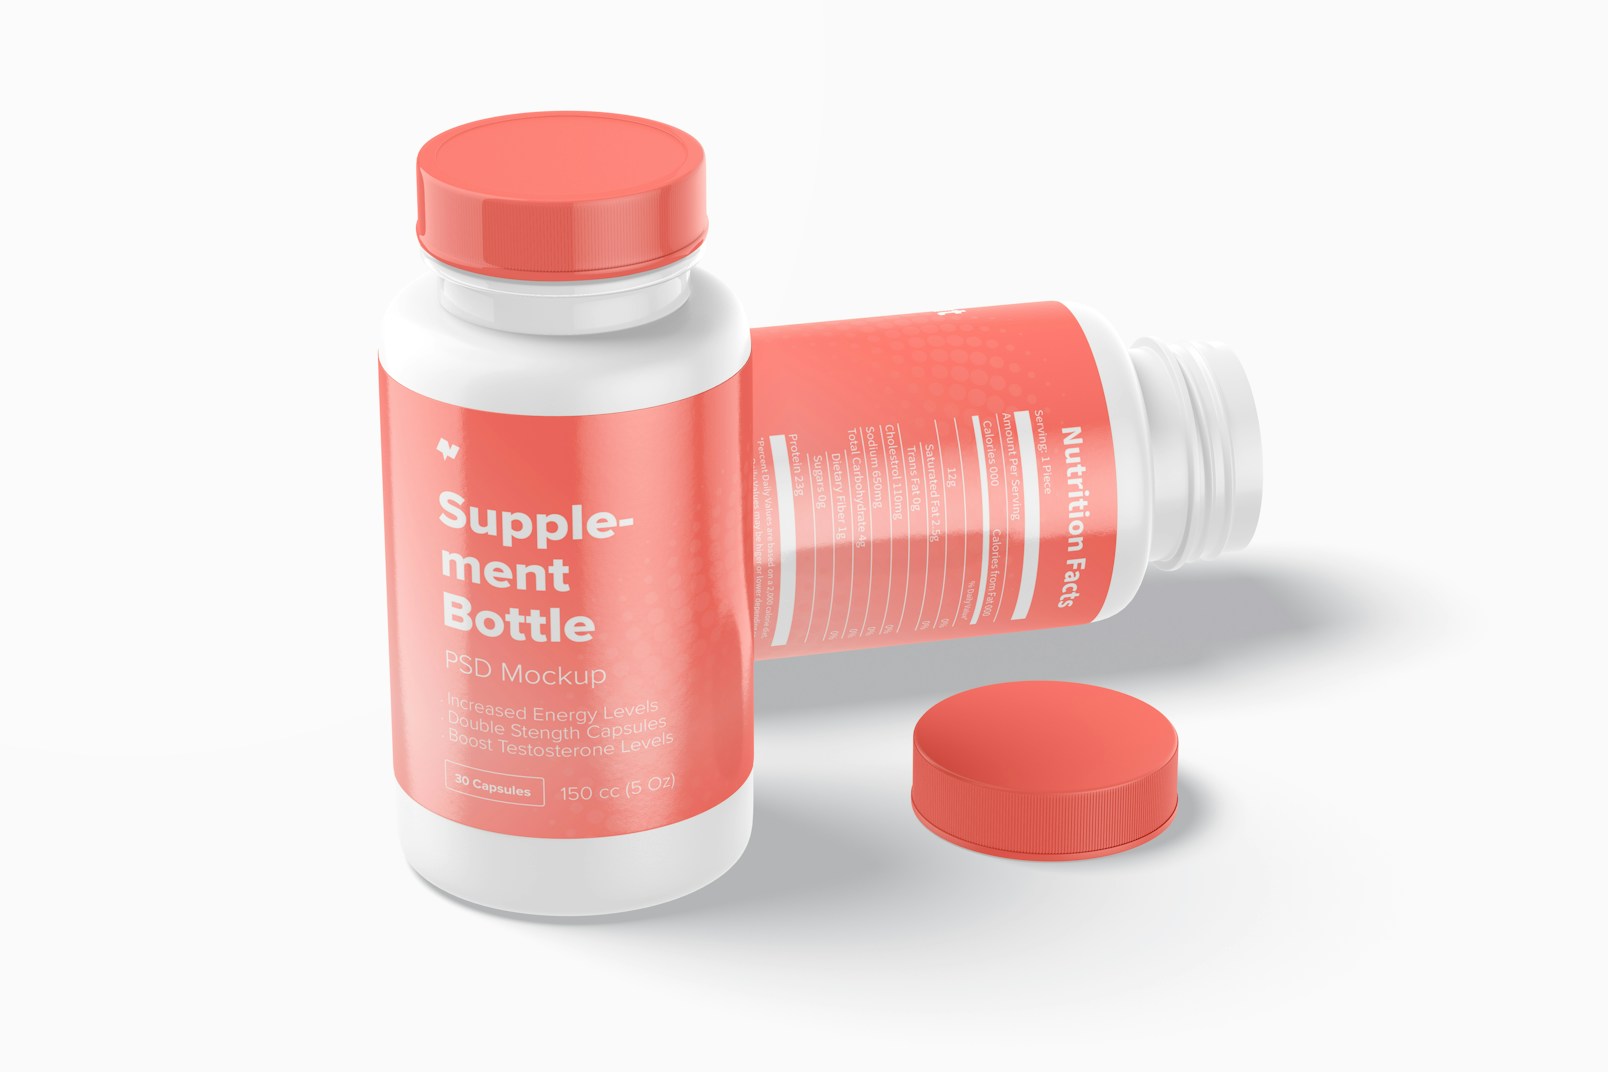 150 cc Supplement Bottles Mockup, Closed and Opened